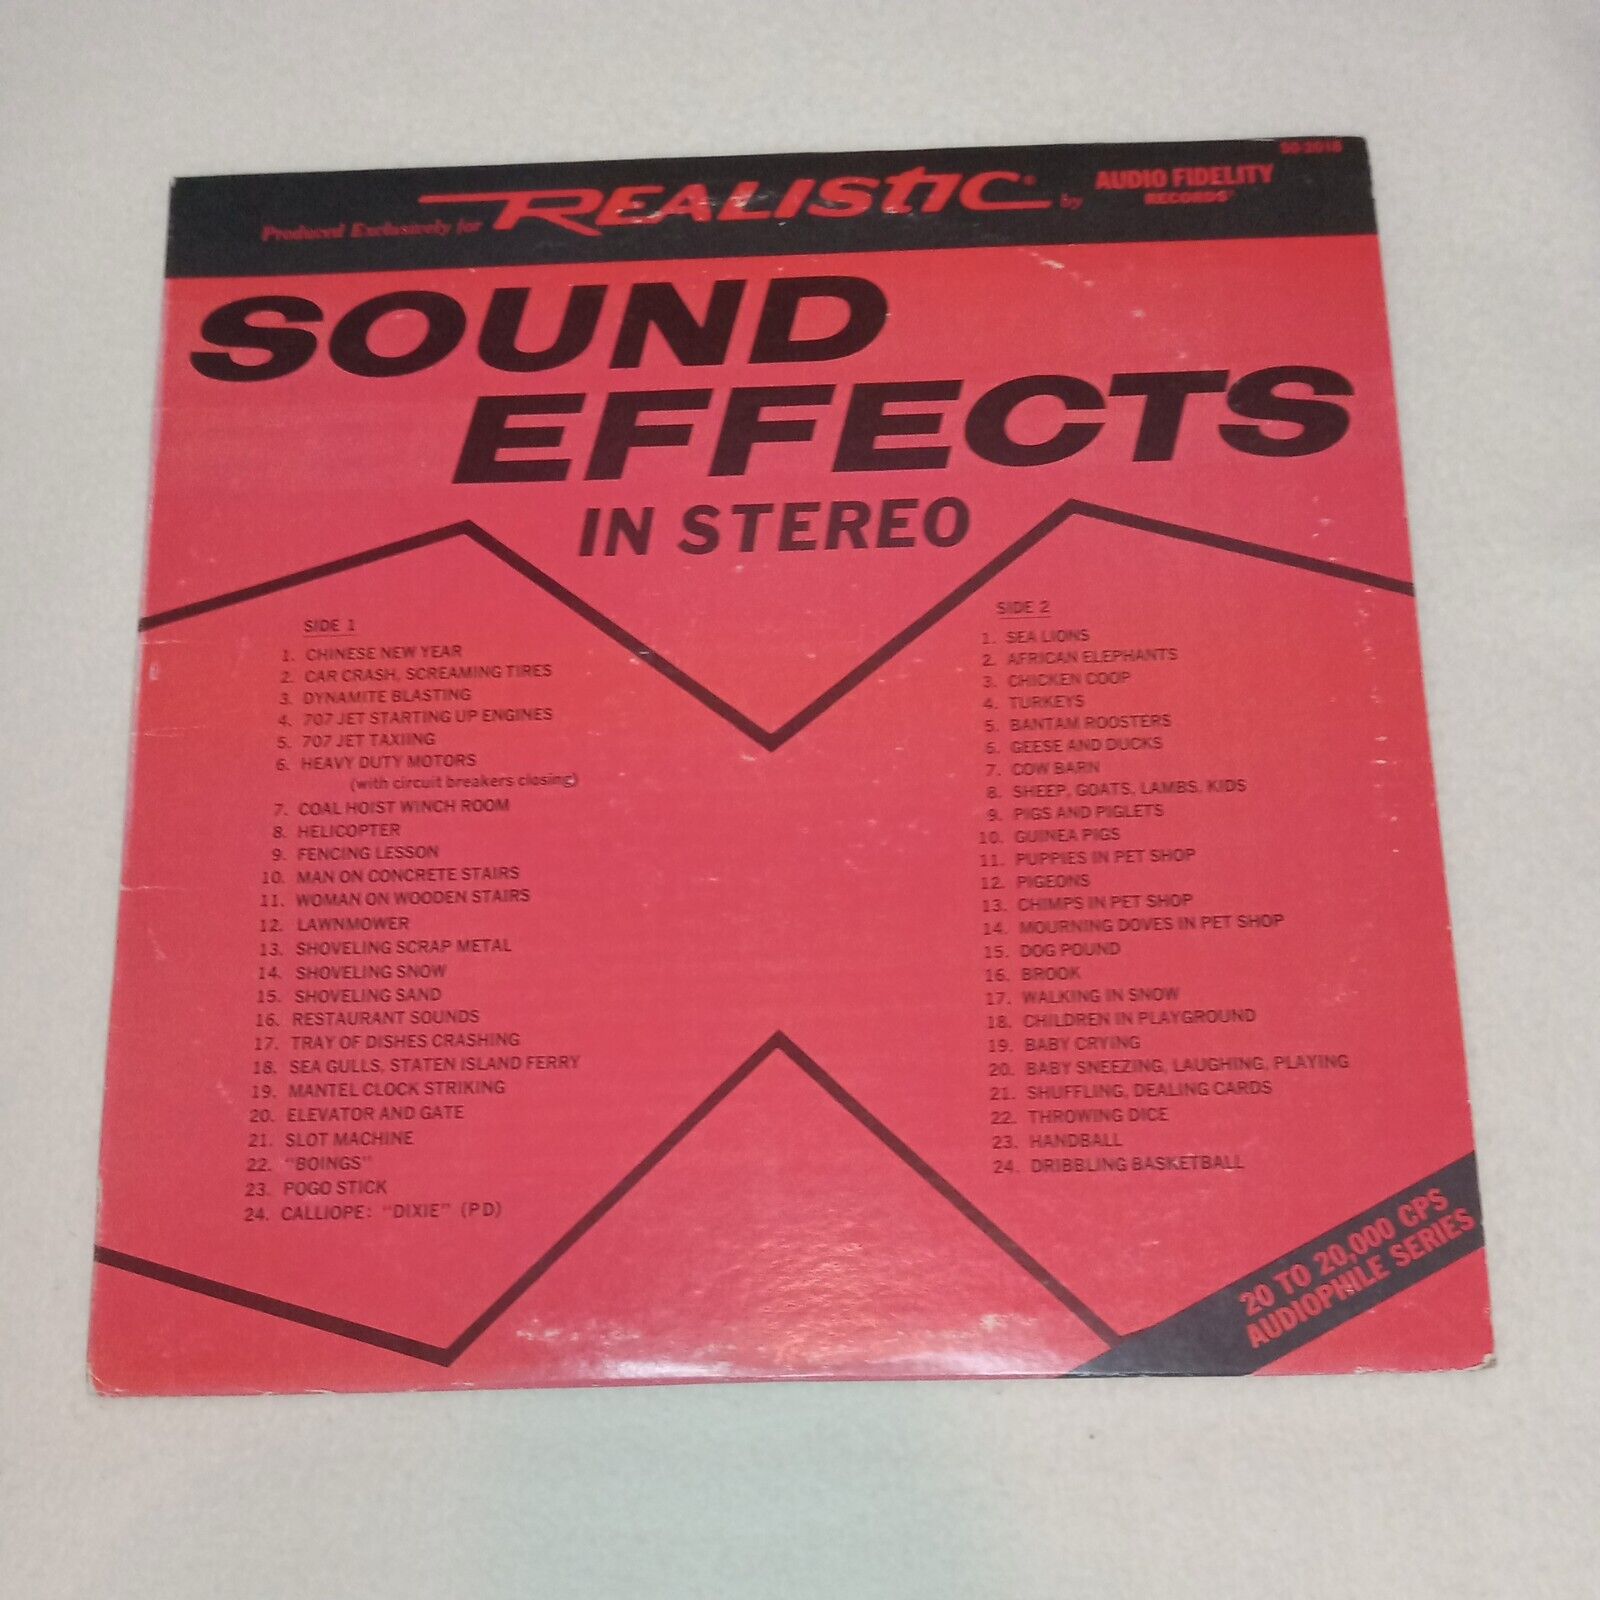 Realistic Sound Effects In Stereo 1971 Audio Fidelity 50-2018 LP 50 Effects